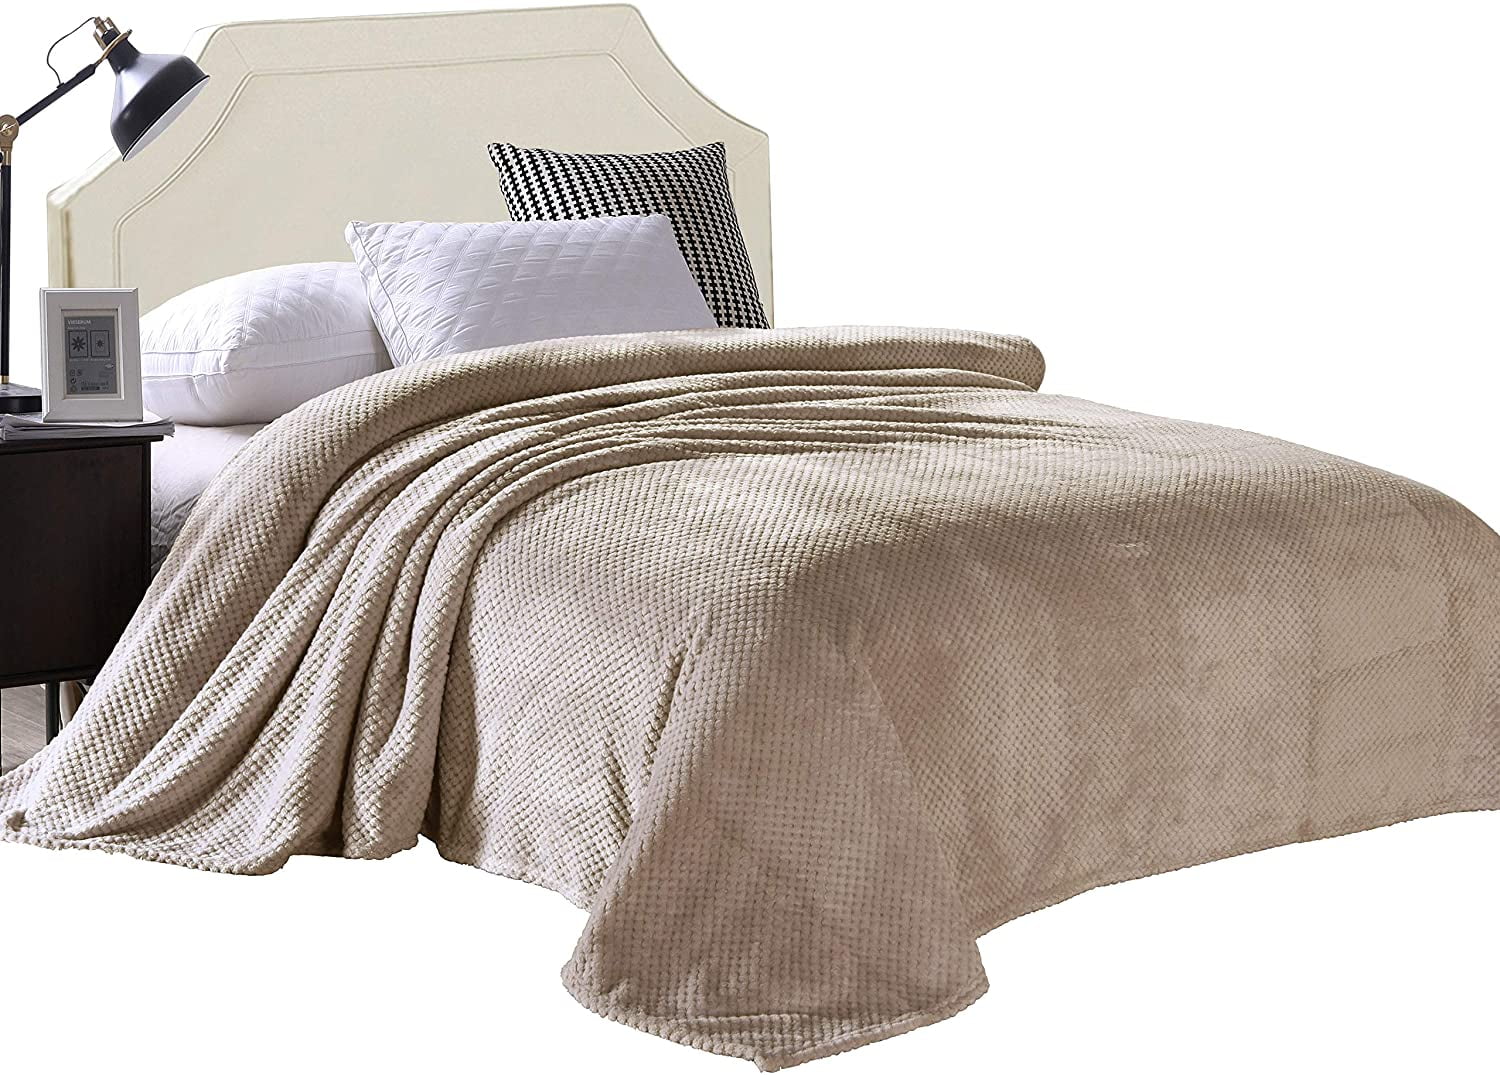 Details about   Flannel Blankets Throws Adult Thick Warm Winter Home Soft Luxury Solid Bedding 